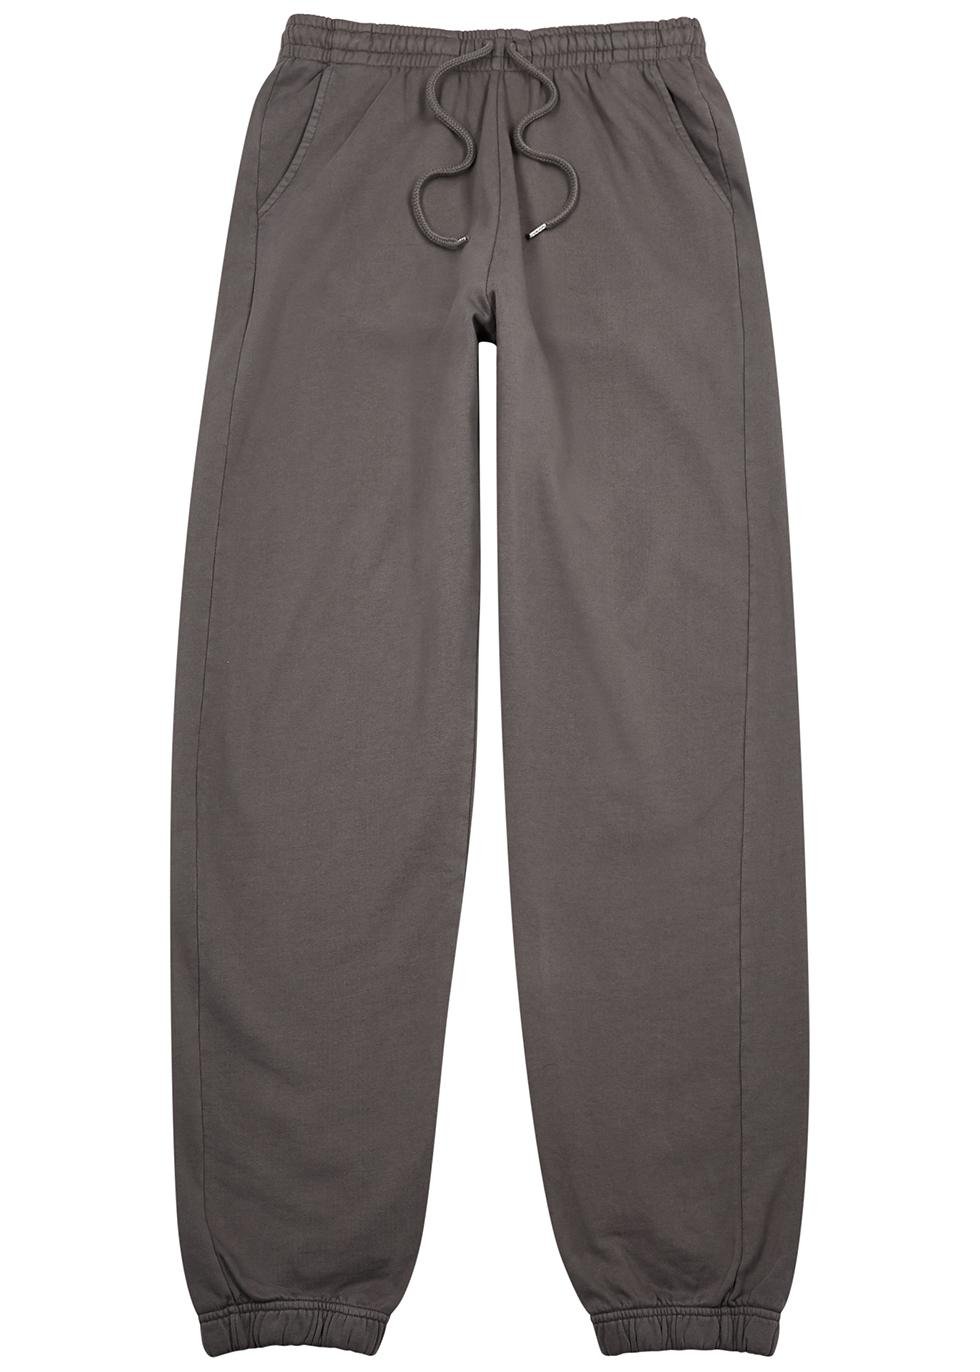 Cotton sweatpants by COLORFUL STANDARD